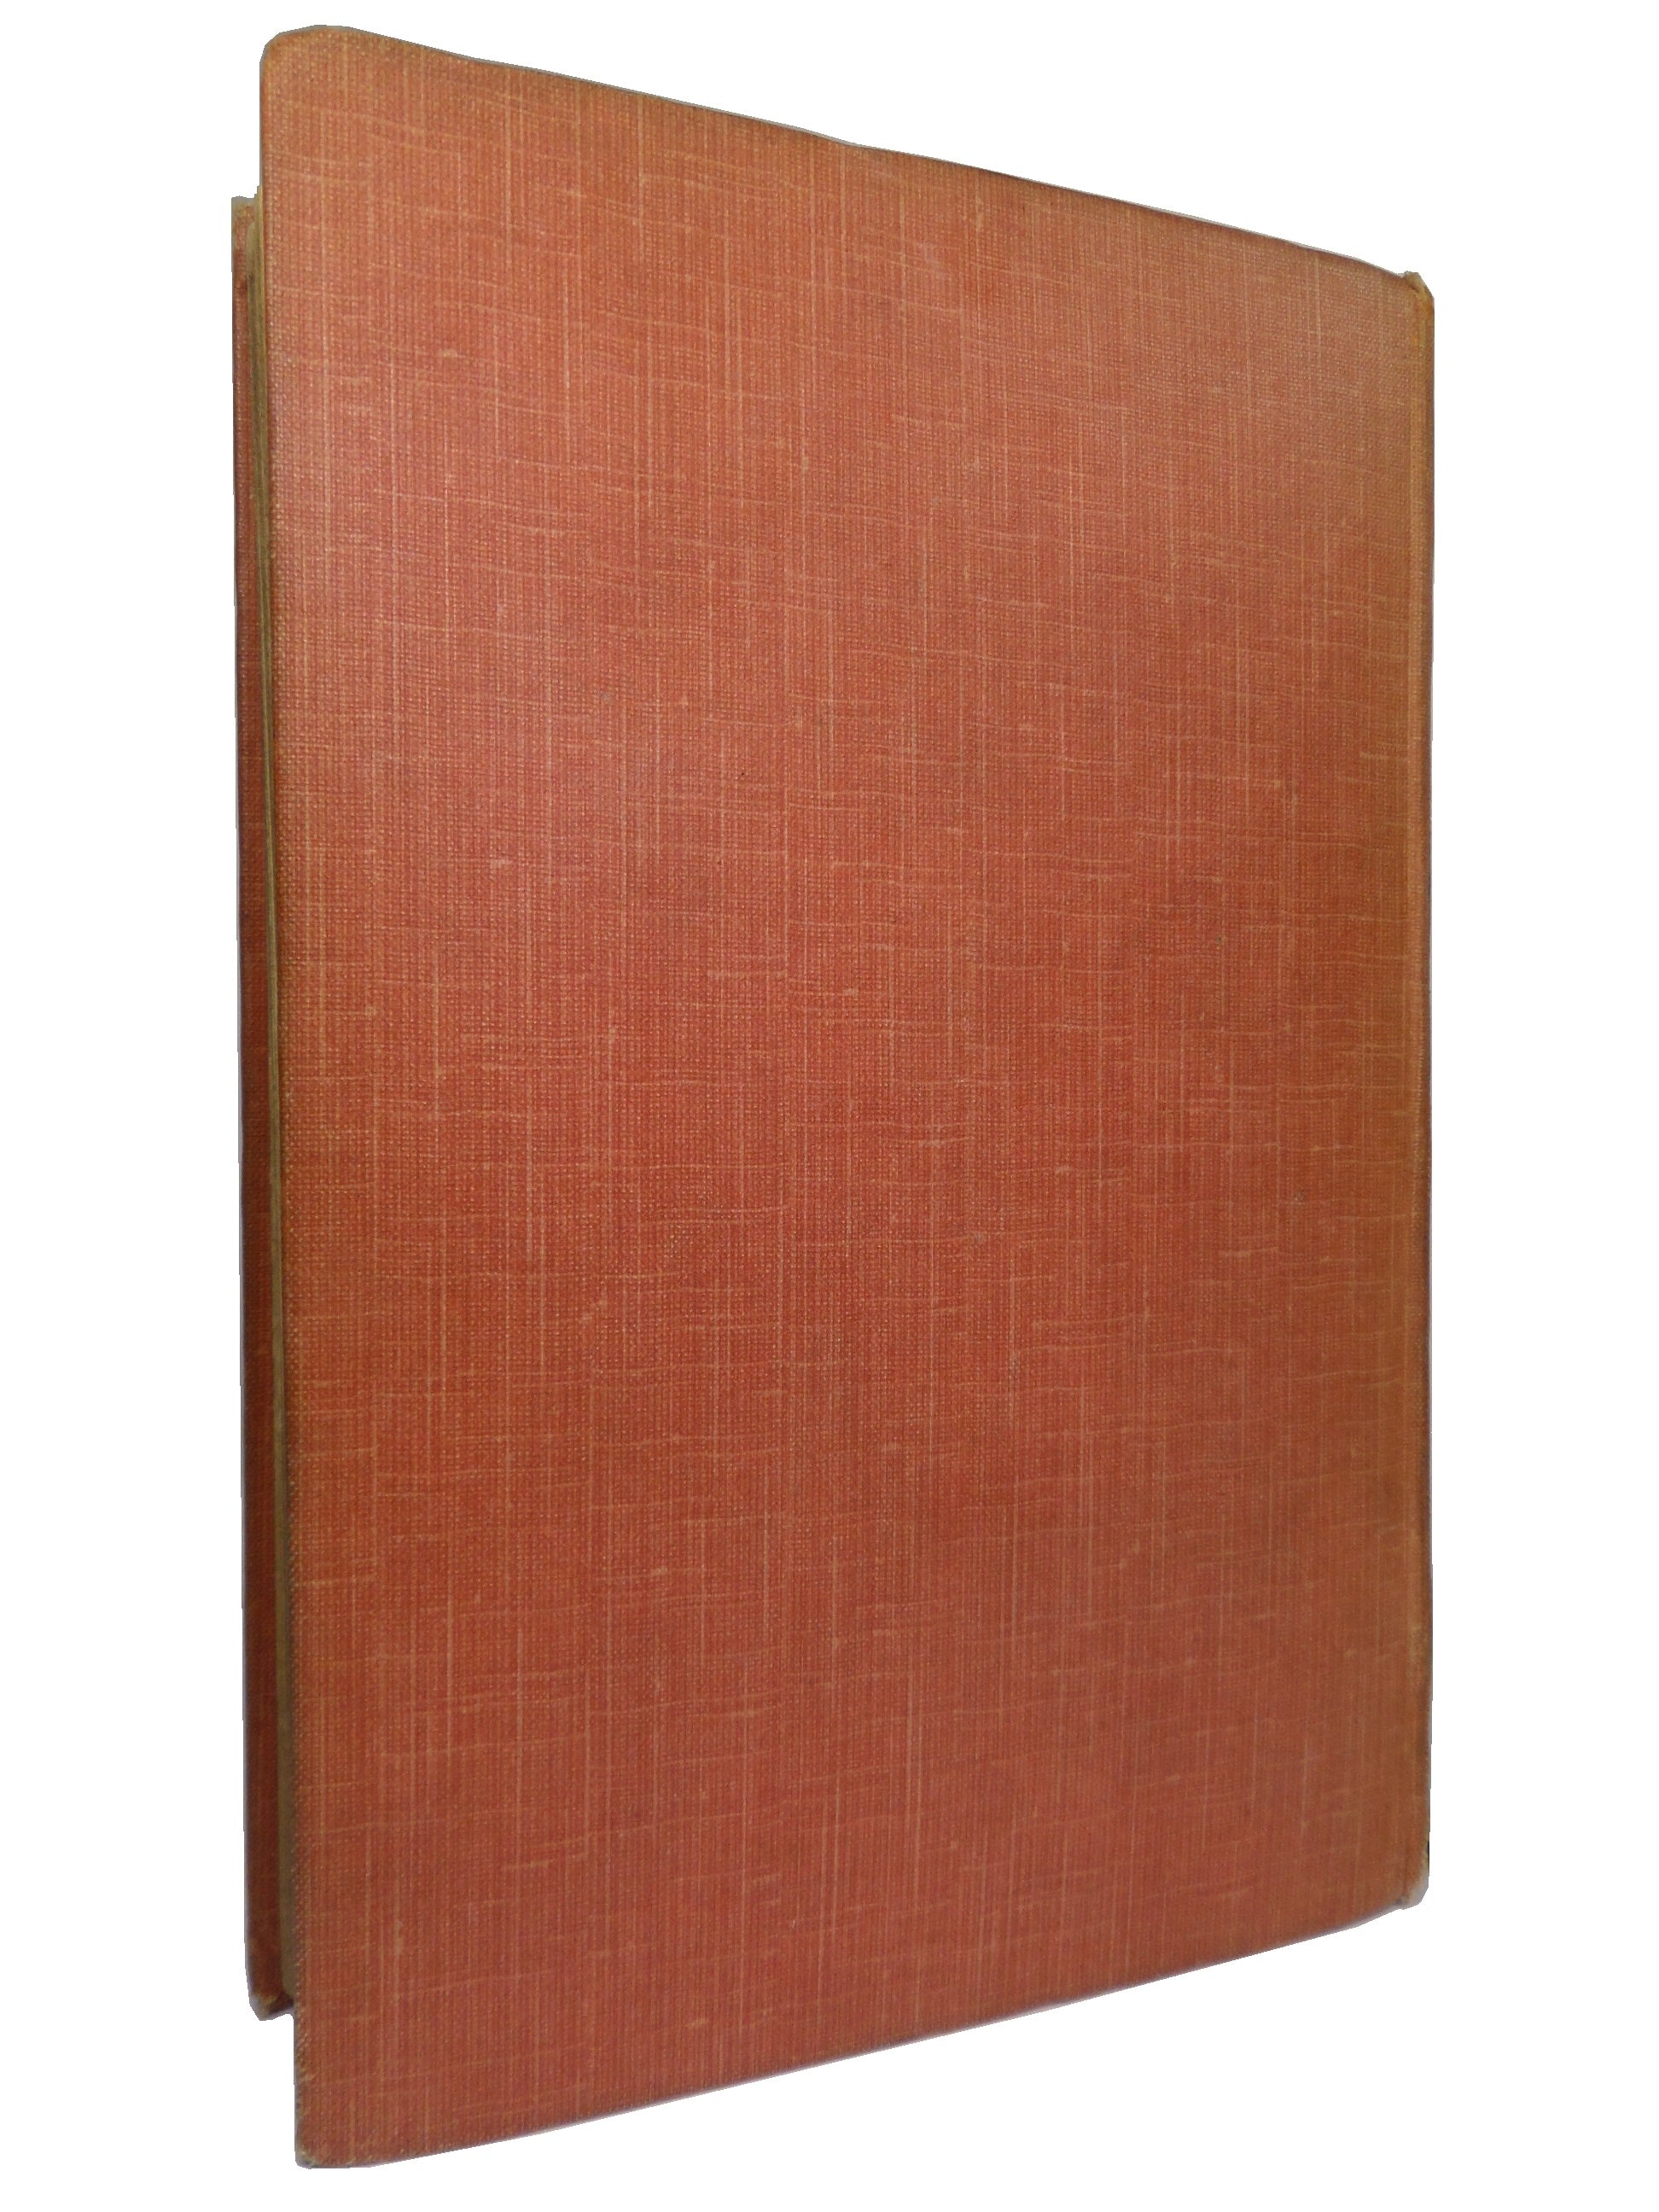 PRIDE AND PREJUDICE BY JANE AUSTEN 1899 ILLUSTRATED BY CHARLES E. BROCK